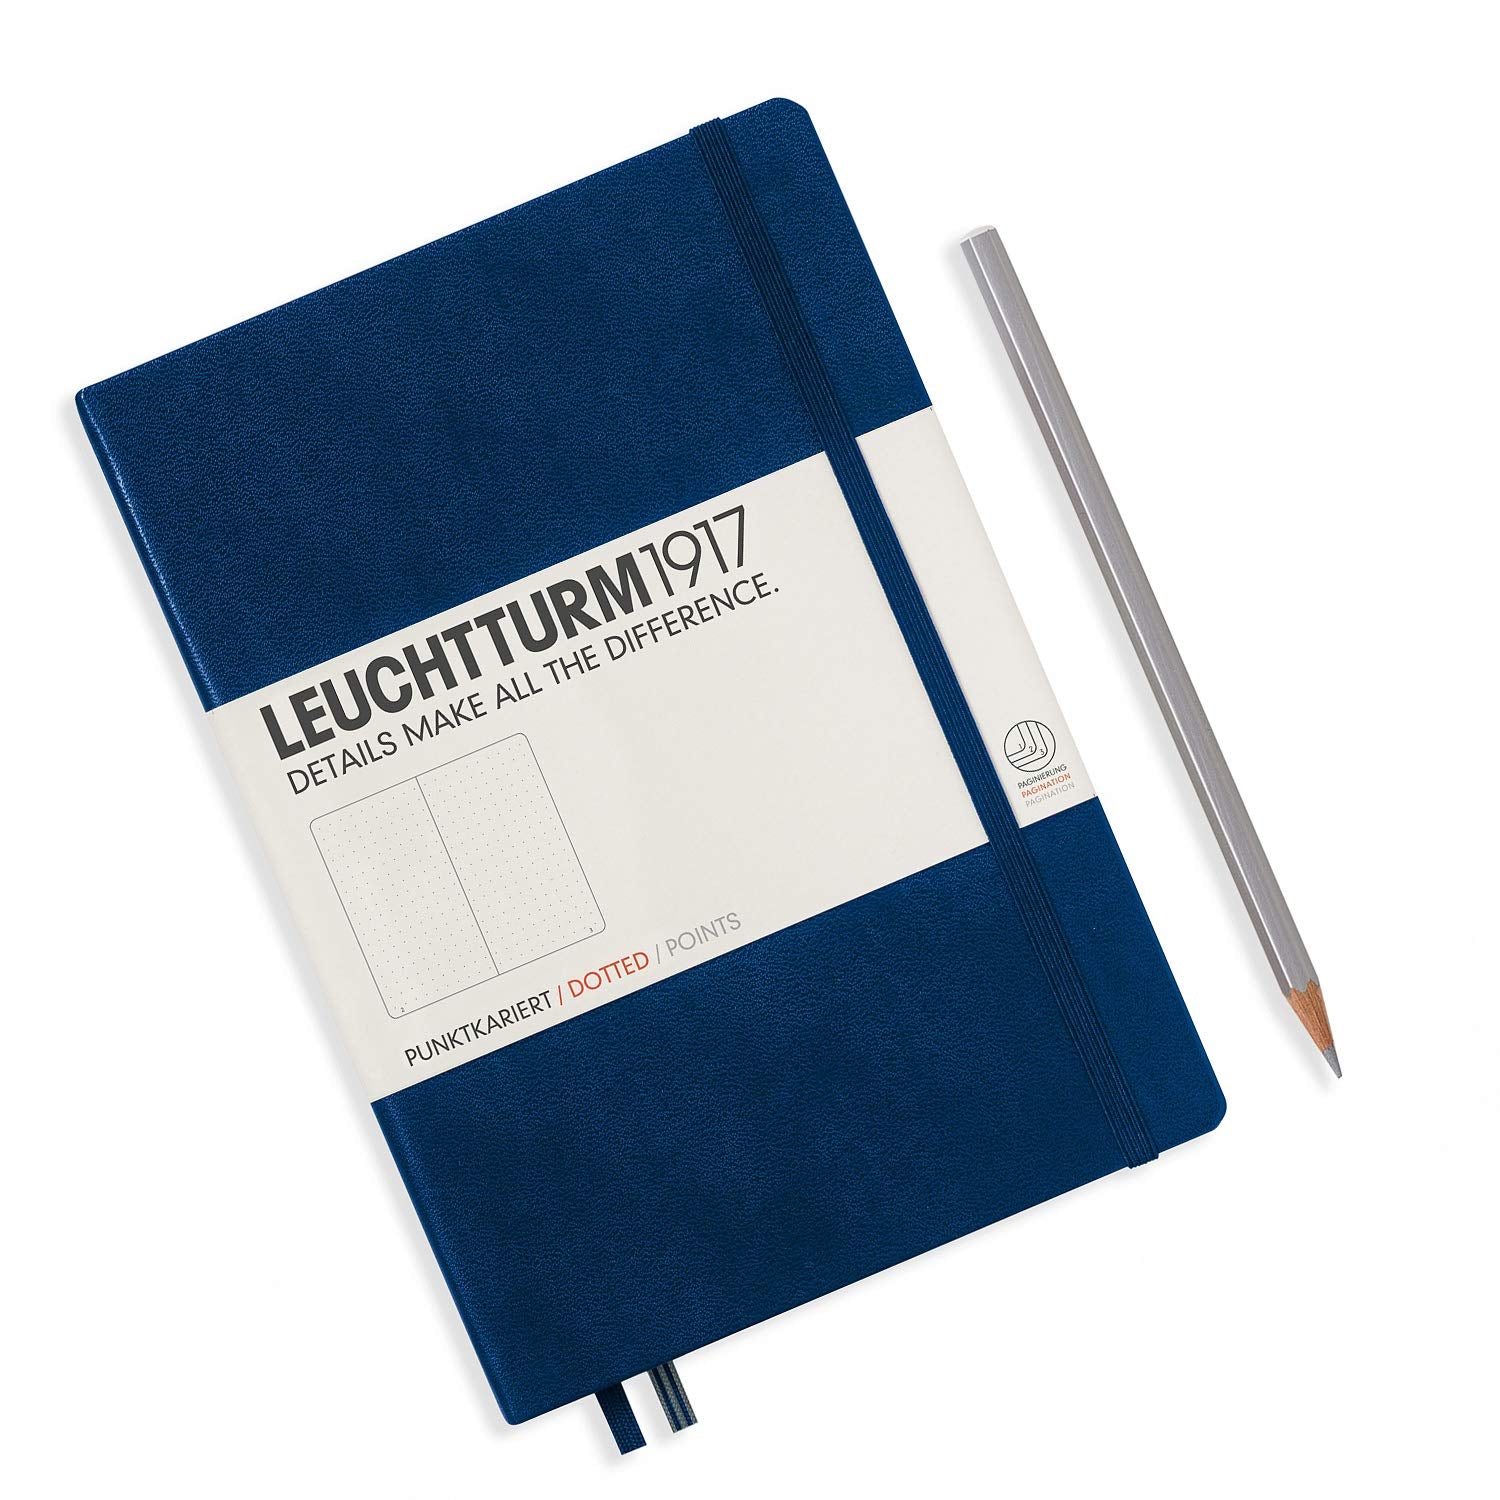 Leuchtturm1917 Medium A5 Dotted Hardcover Notebook (Navy) - 249 Numbered Pages